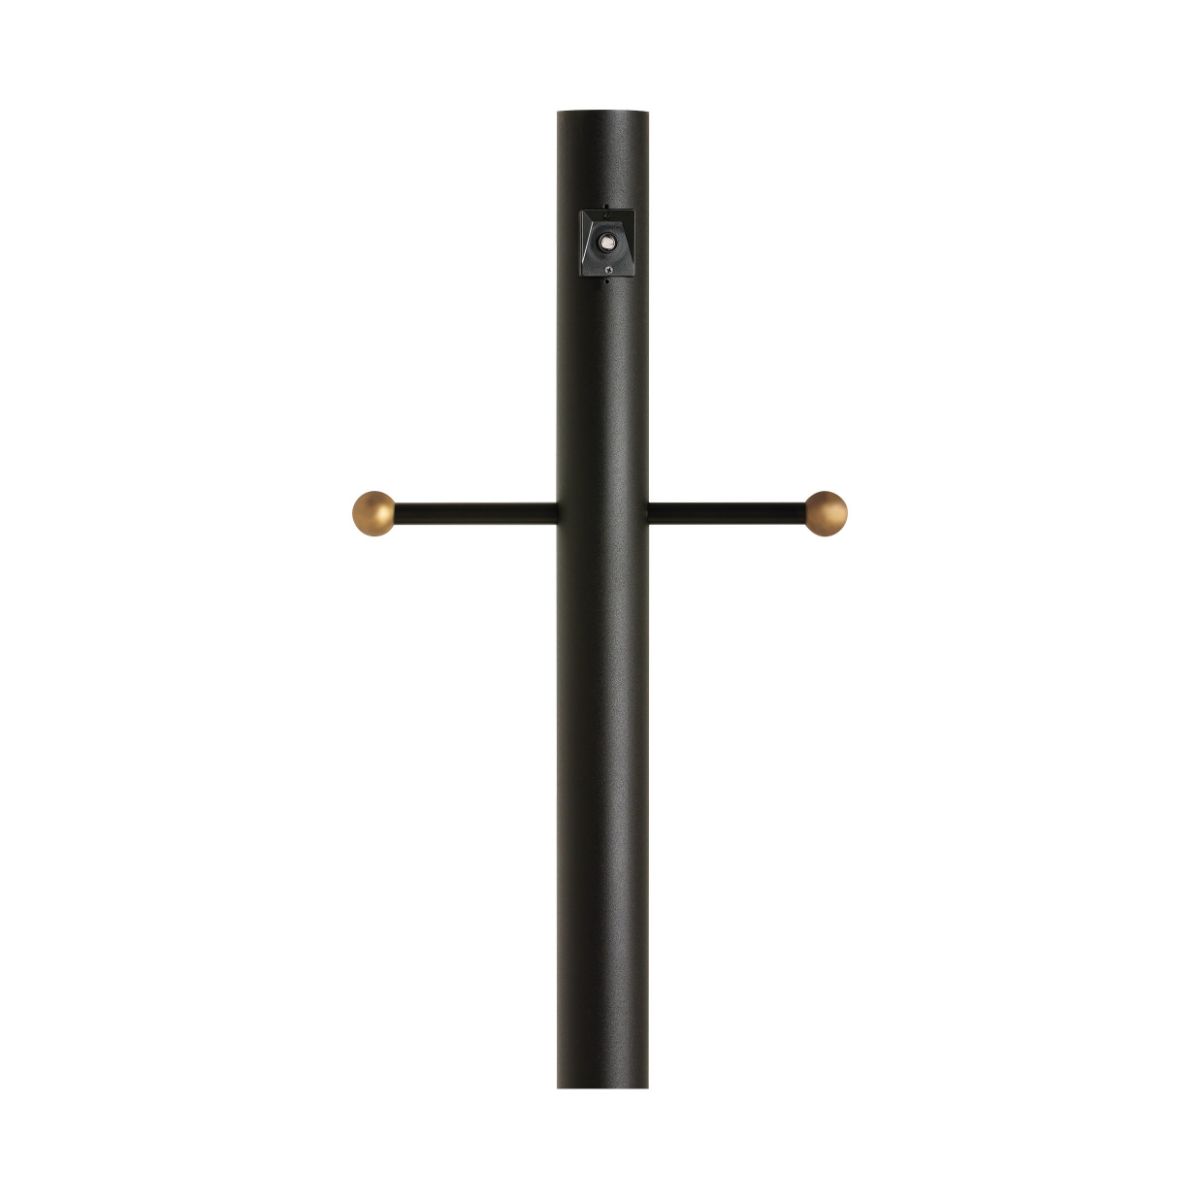 7 Ft Round Aluminum Pole with Photo Electric Control and Ladder Rest 3 In. Shaft Black Finish - Bees Lighting